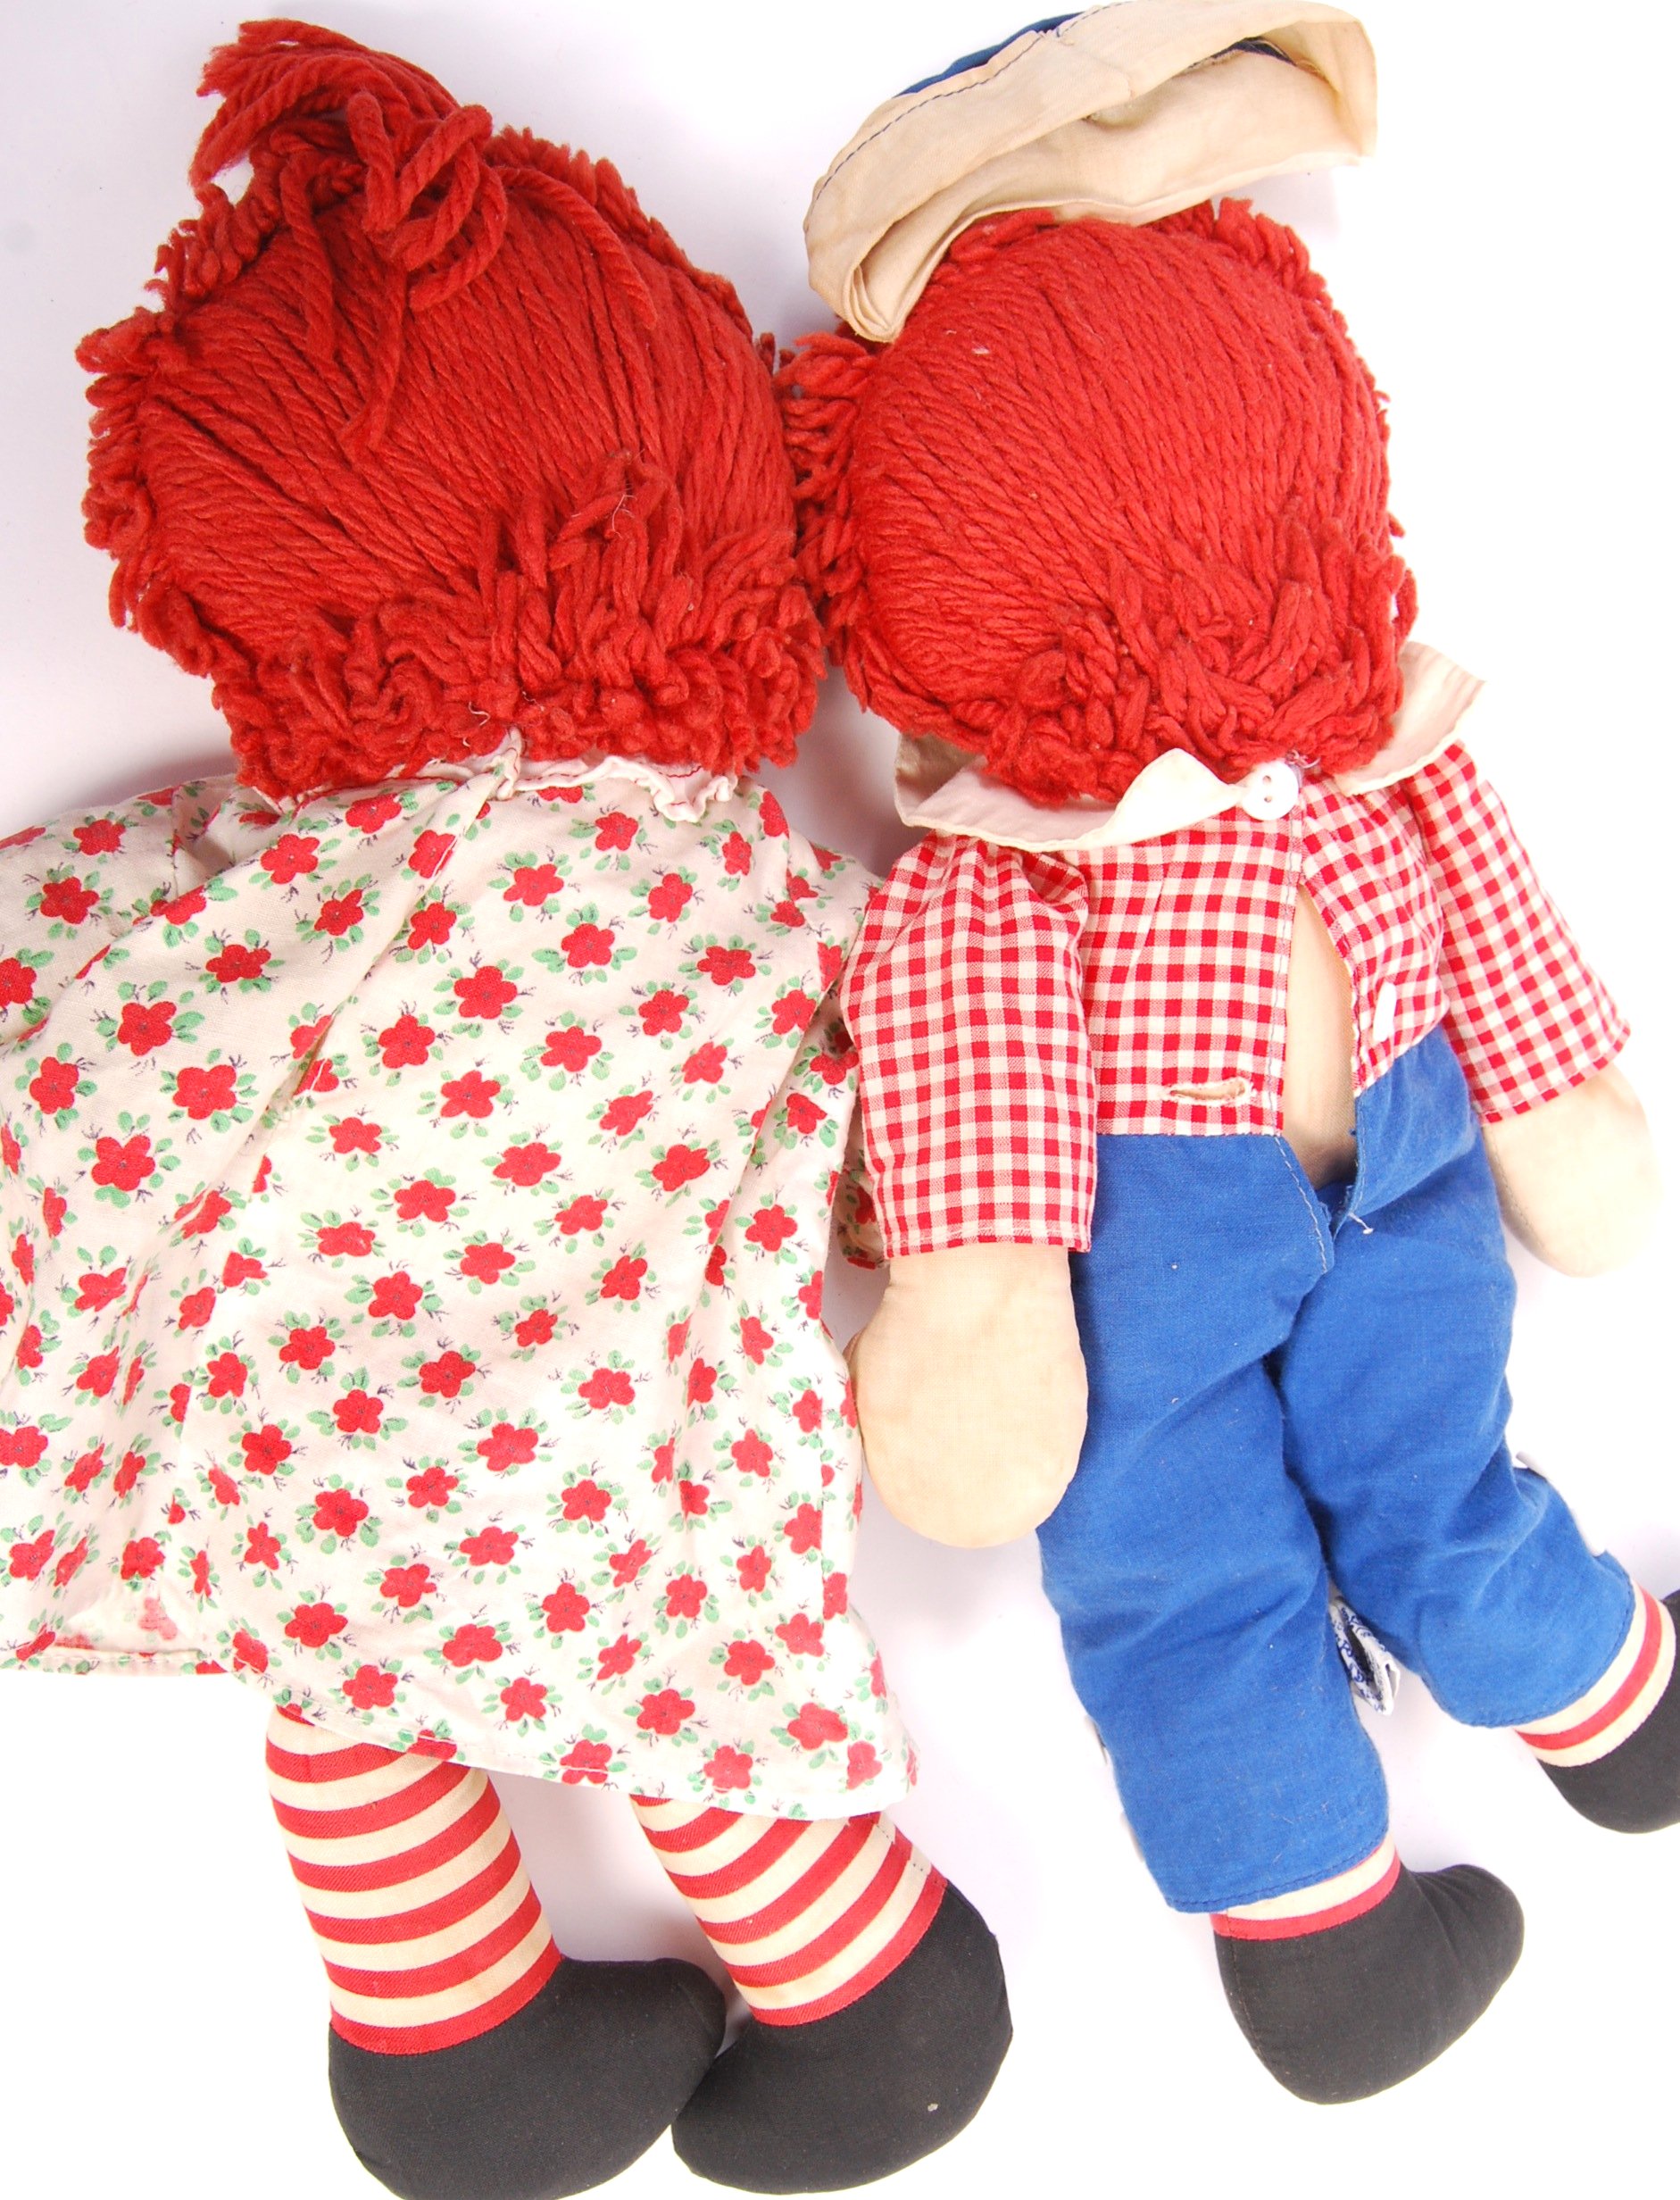 RARE VINTAGE PAIR OF RAGGEDY ANN DOLLS / SOFT TOYS - Image 5 of 7